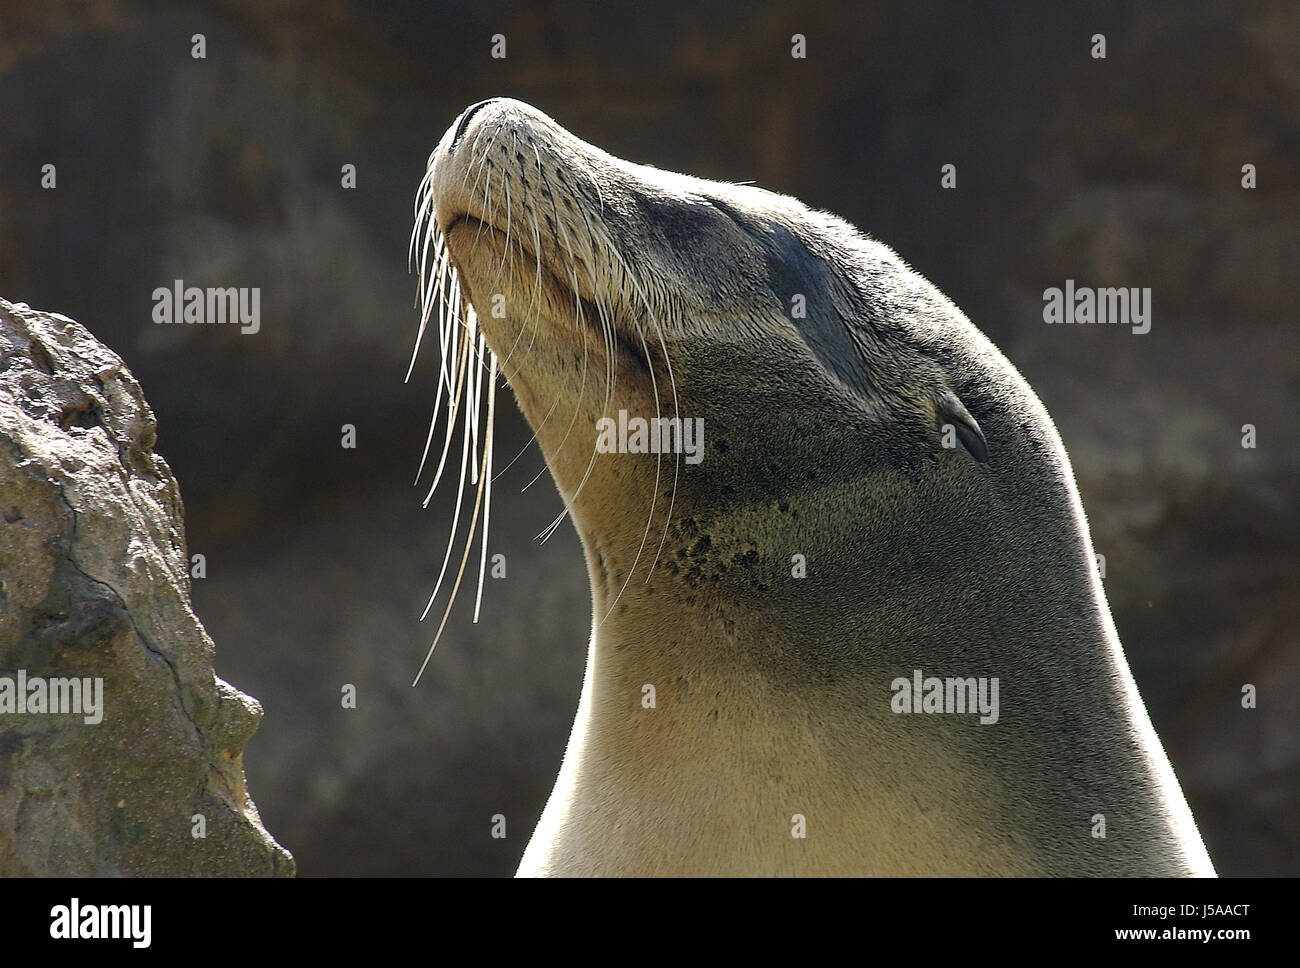 suns seal sea lion salt water sea ocean water hhere sugetiere eutheria Stock Photo